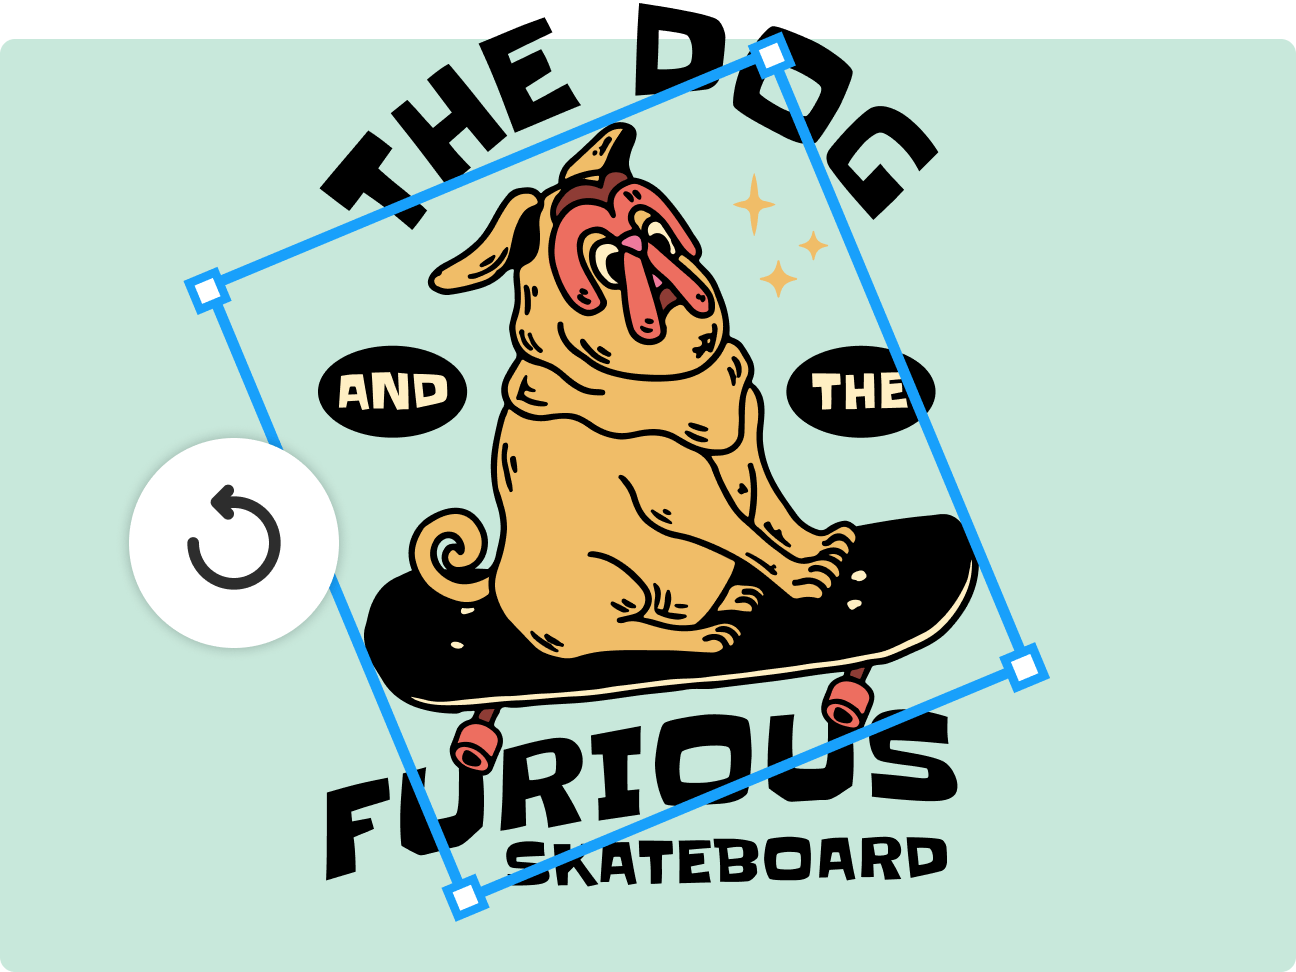 Fun illustration with a dog on a skateboard is rotated to fit into a logo design.